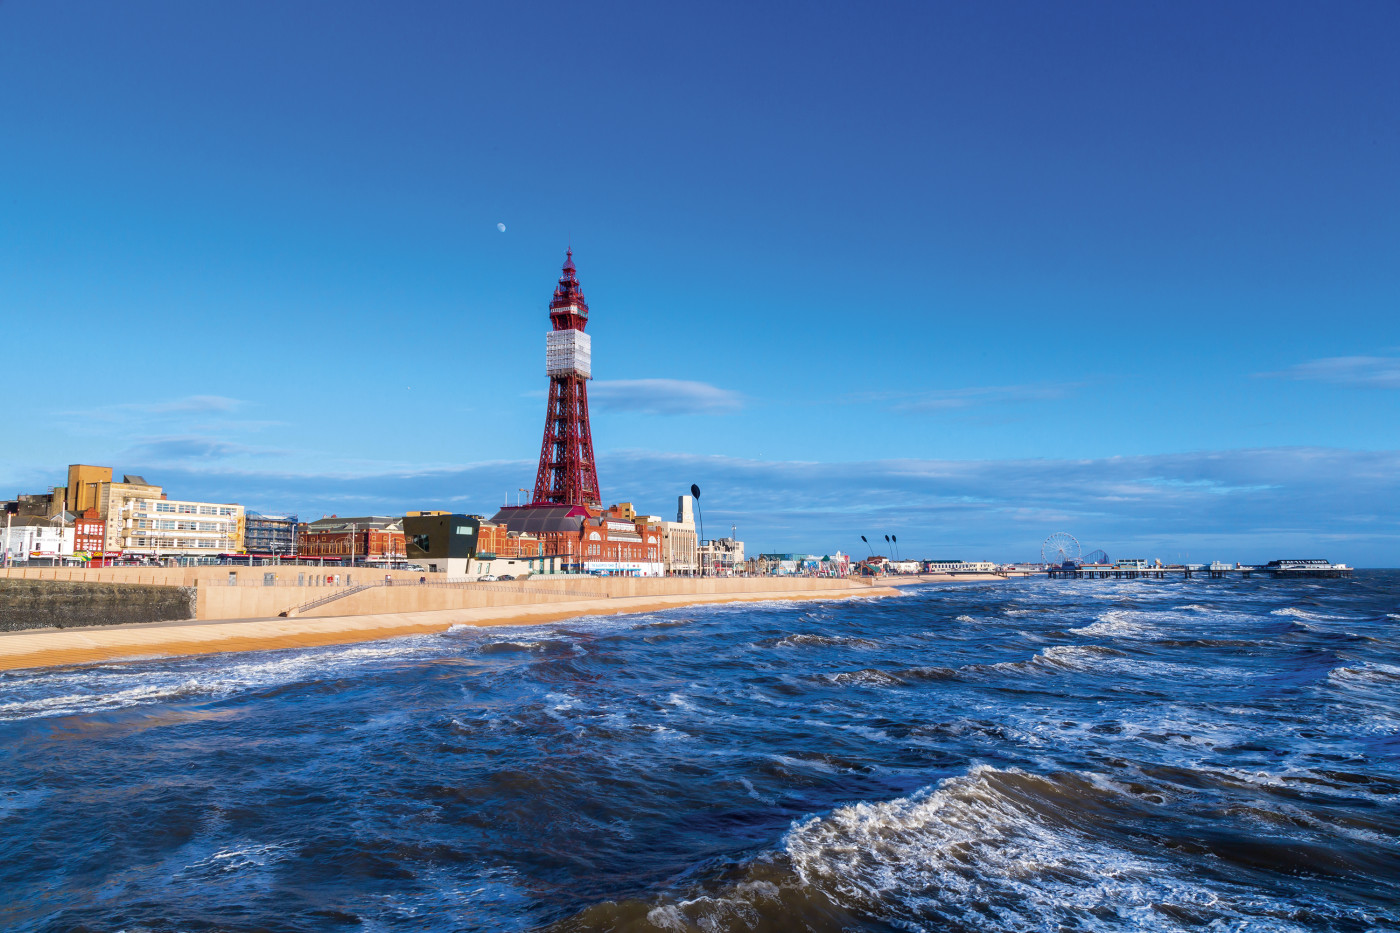 Places to visit in Blackpool